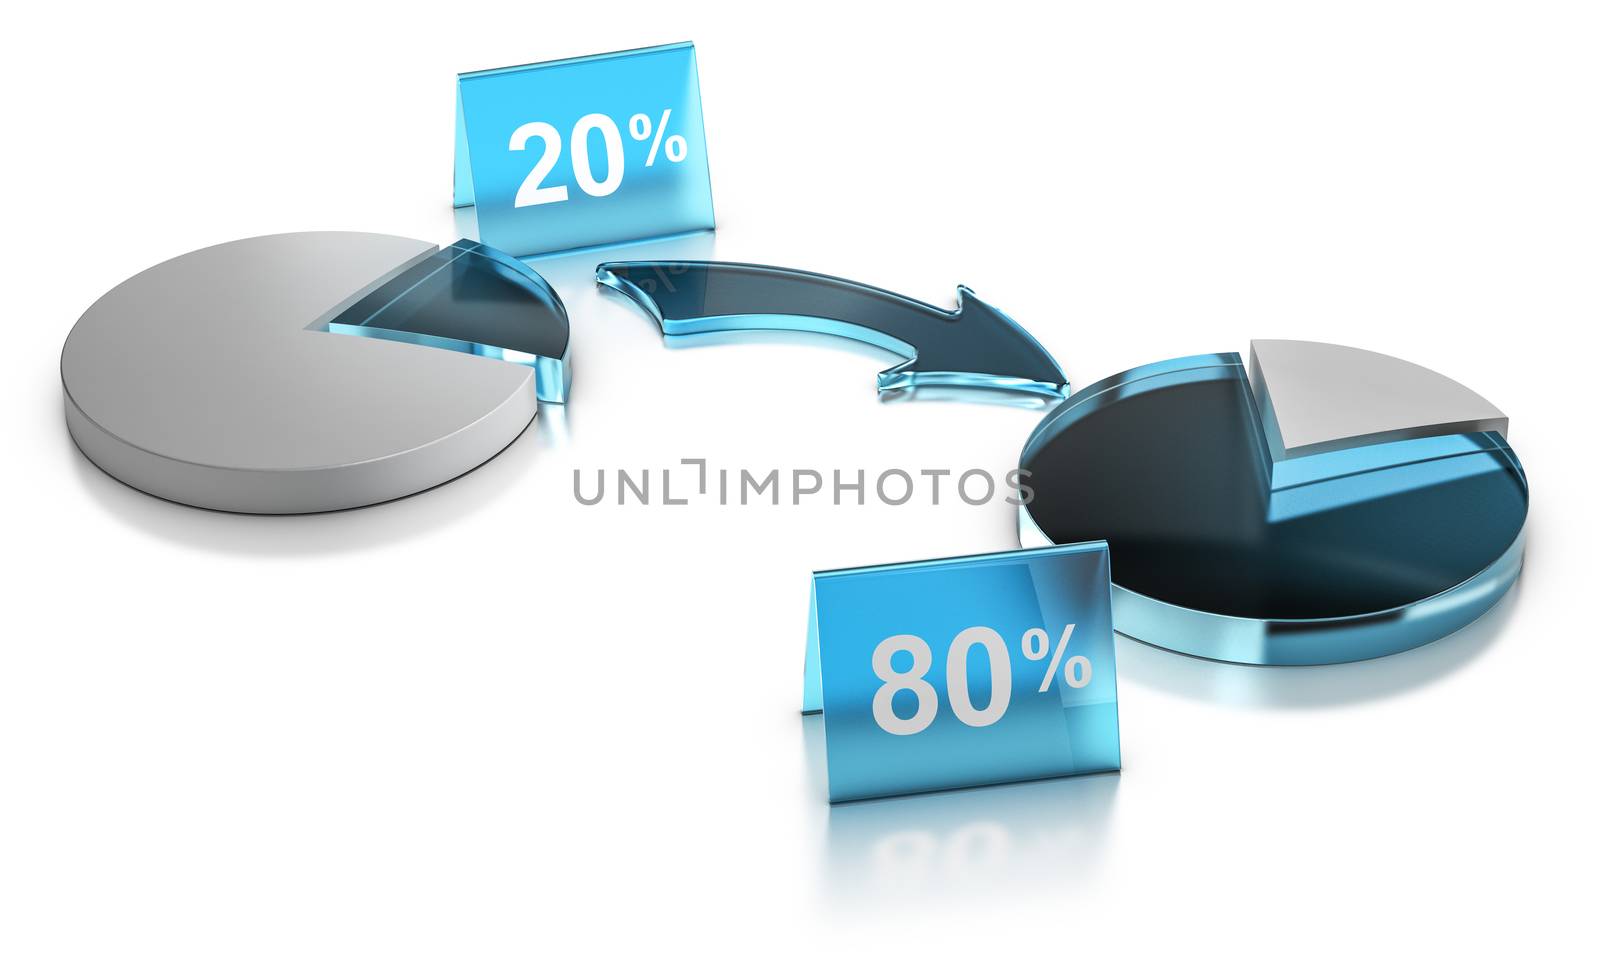 3D illustration of a graphic chart of Pareto principle or Rule of 80 20 over white background.